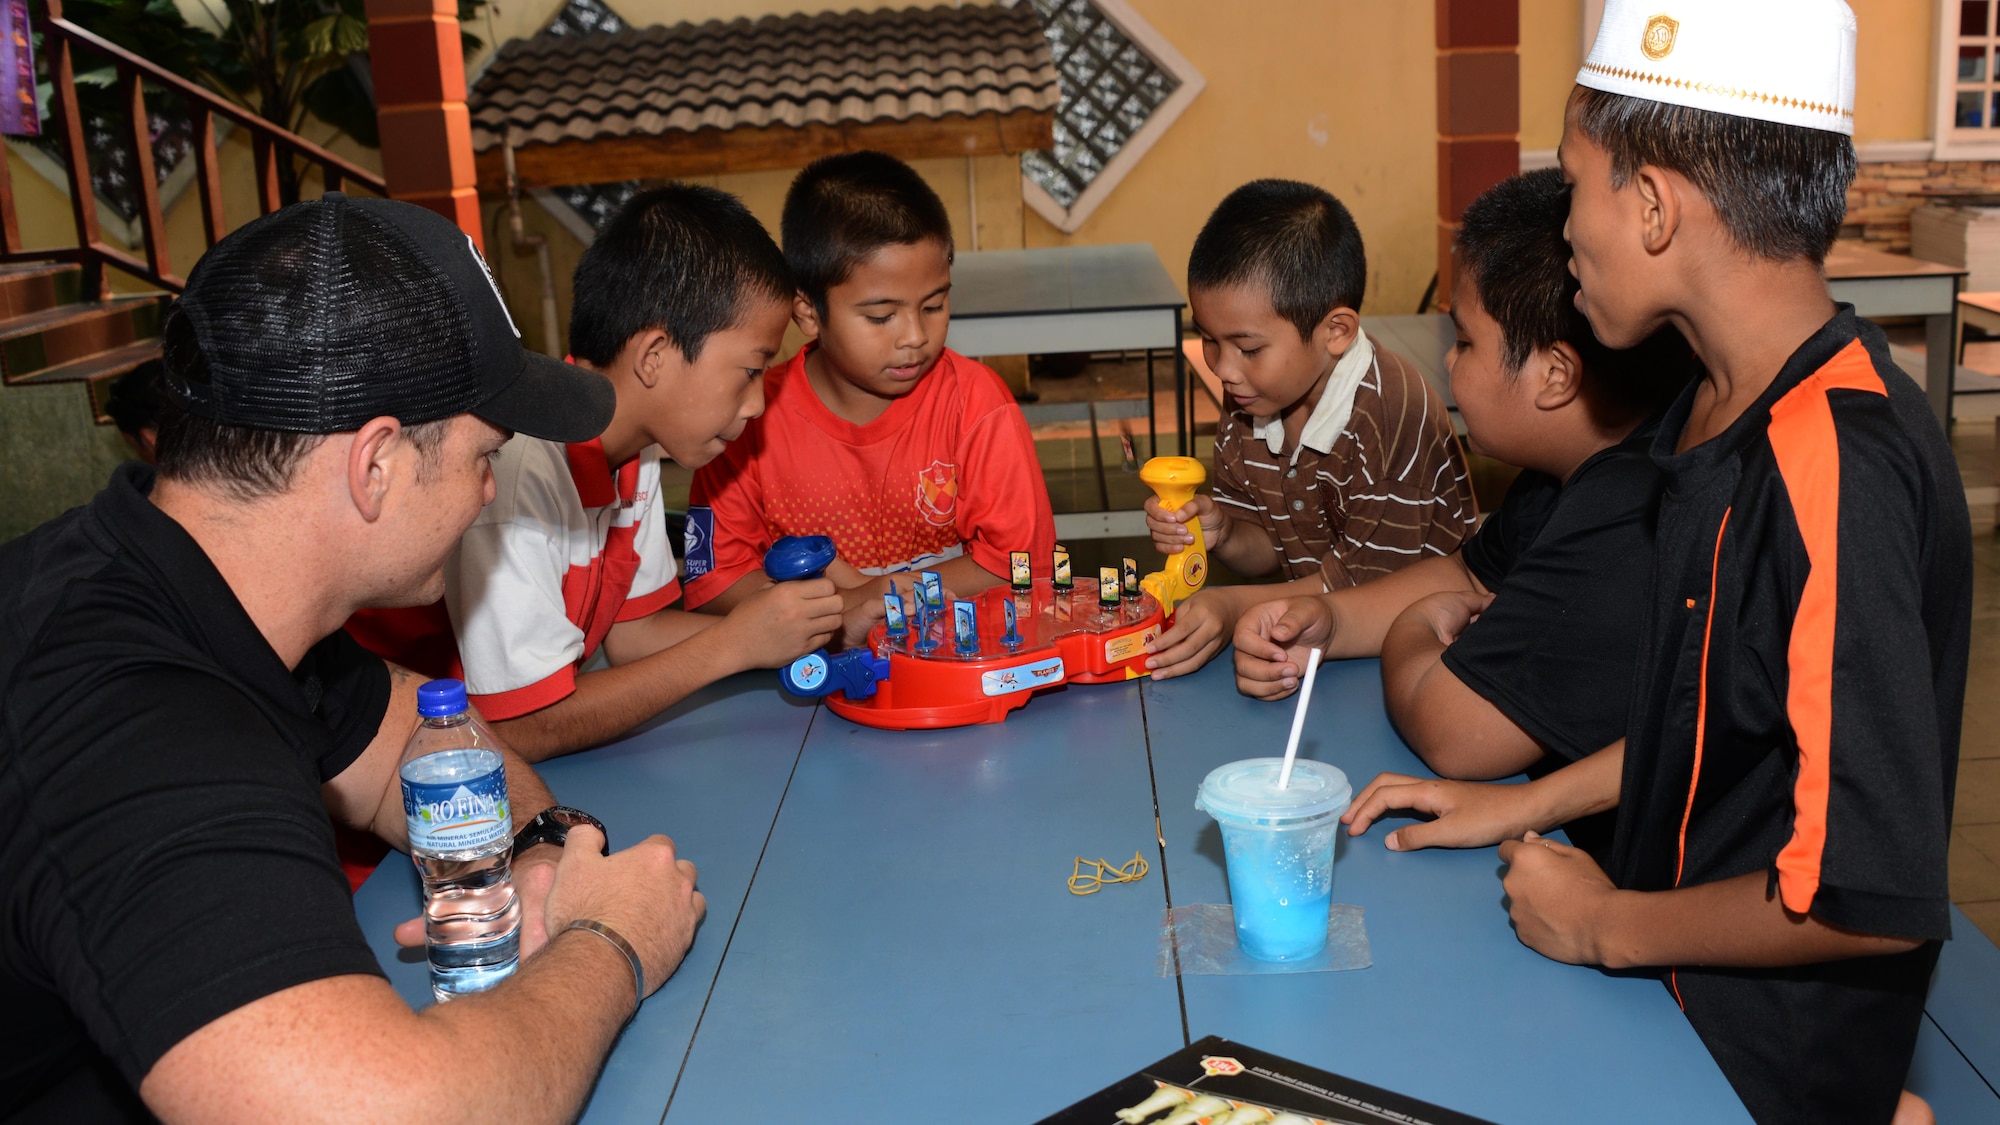 U.S. Air Force Capt. Forrest Underwood, a pilot from the 17th Special Operations Squadron, plays games with boys from the Rumah Kasih Hormoni Orphanage near Kuala Lumpur, Malaysia, June 6, 2015.  As part of Exercise Teak Mint, members from the RMAF, U.S. Air Force came together to help with repairs around the orphanage and donated more than  $1,000 in clothes, games and sports equipment.  (U.S. Air Force photo by Tech. Sgt. Kristine Dreyer)